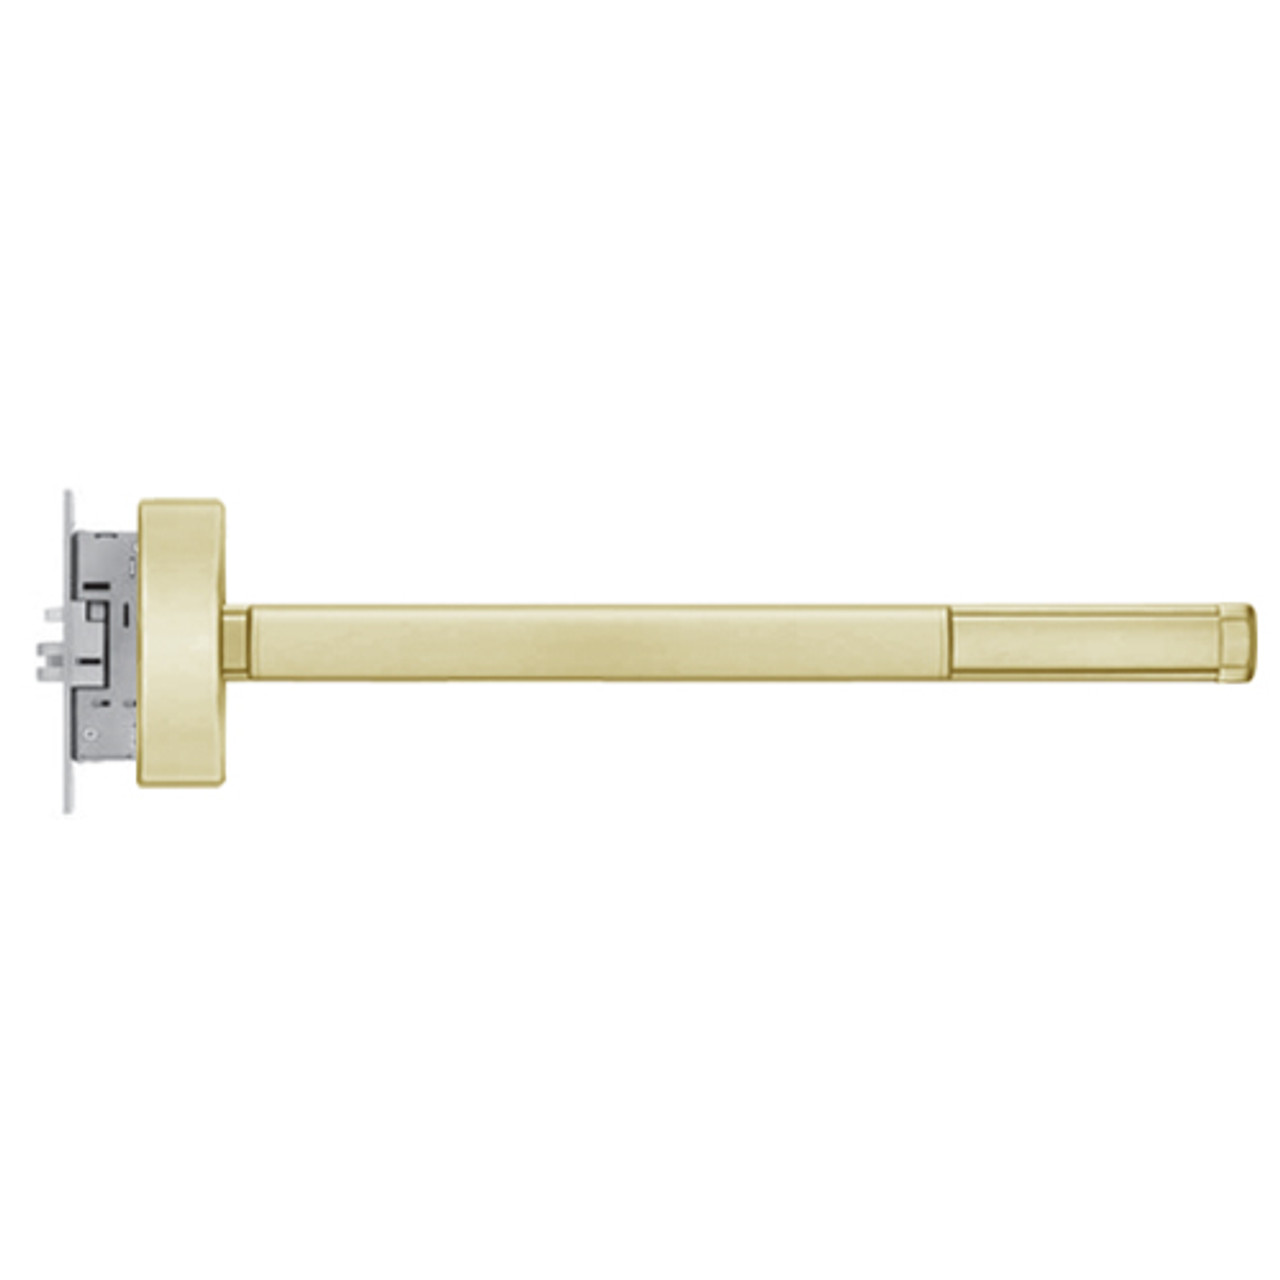 2303-LHR-606-36 PHI 2300 Series Non Fire Rated Apex Mortise Exit Device Prepped for Key Retracts Latchbolt in Satin Brass Finish